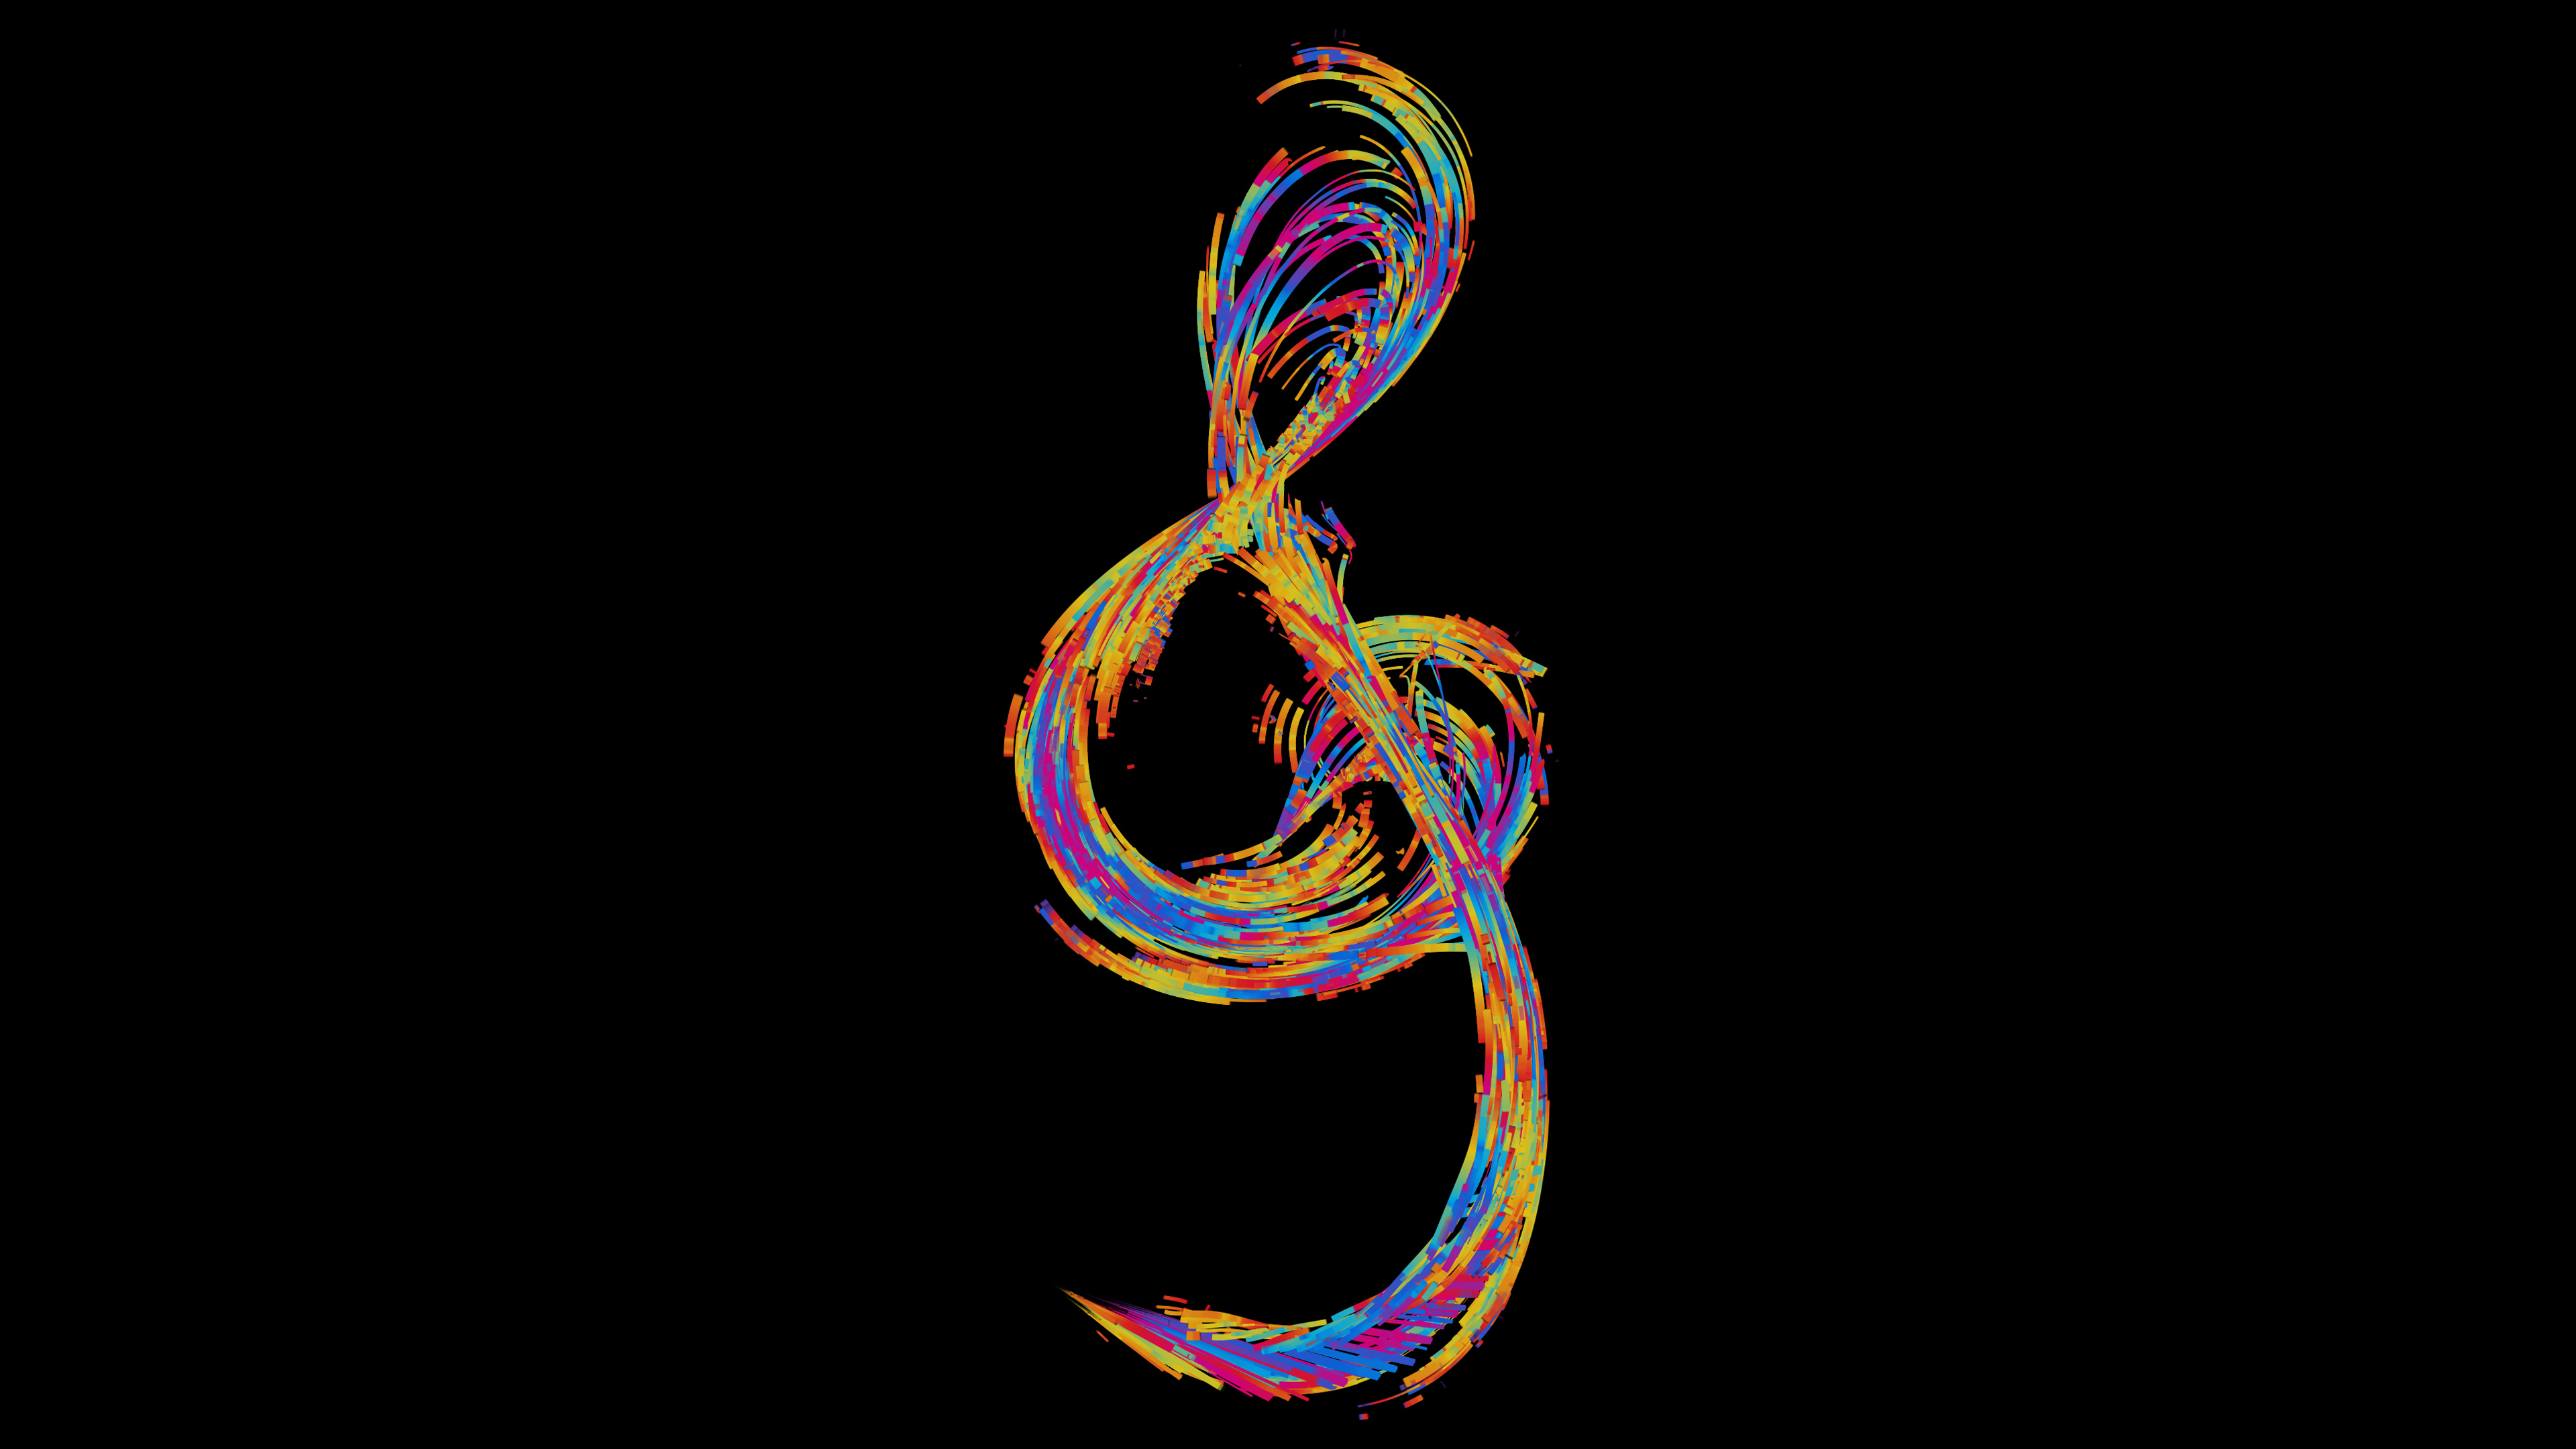 3840x2160 Colorful Black Background Musical Notes Digital Art Music Simple Background Minimalism Wallpaper Resolution: ID:1189764